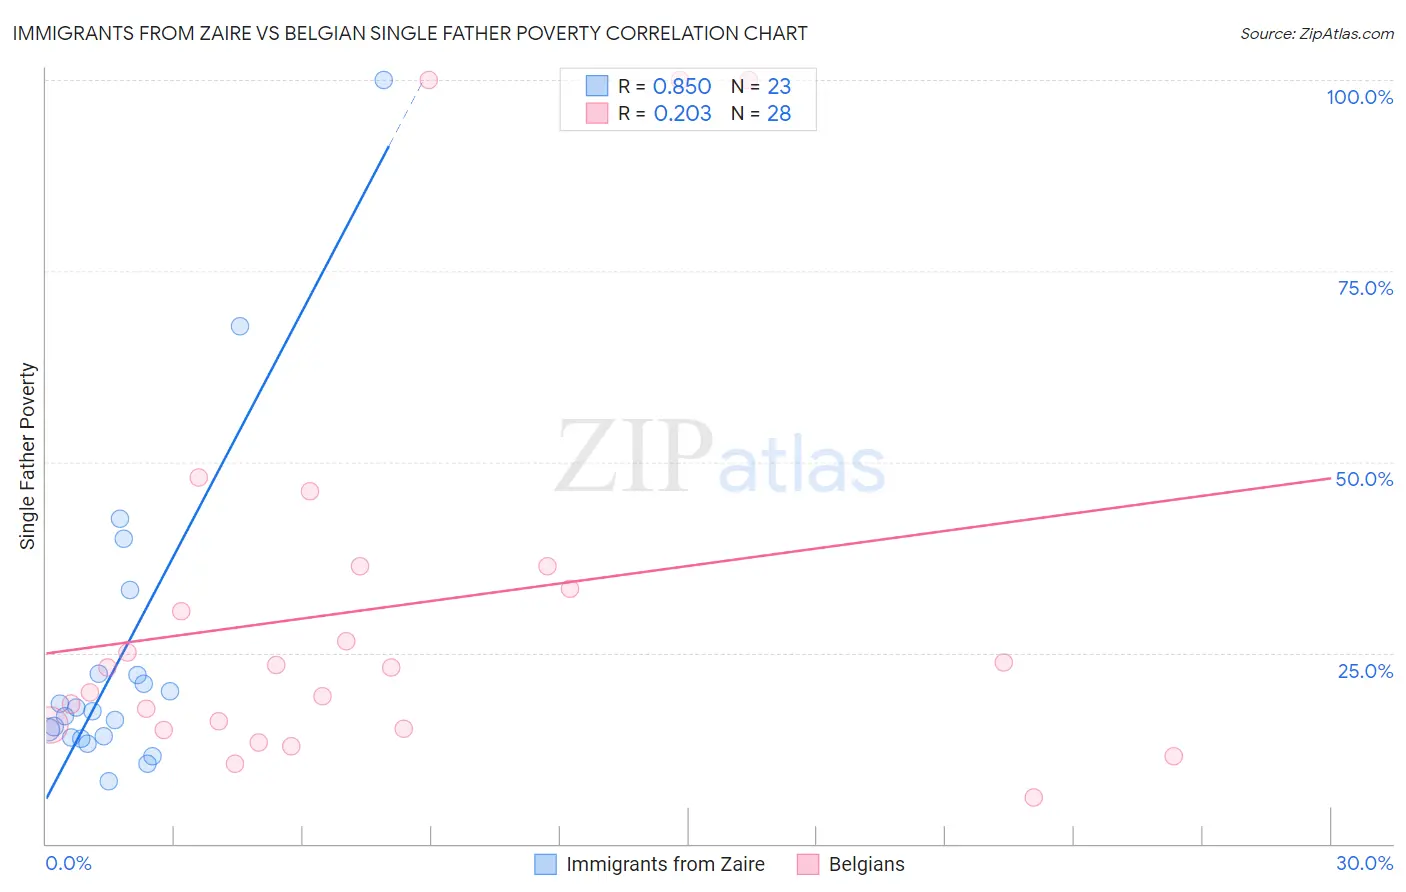 Immigrants from Zaire vs Belgian Single Father Poverty